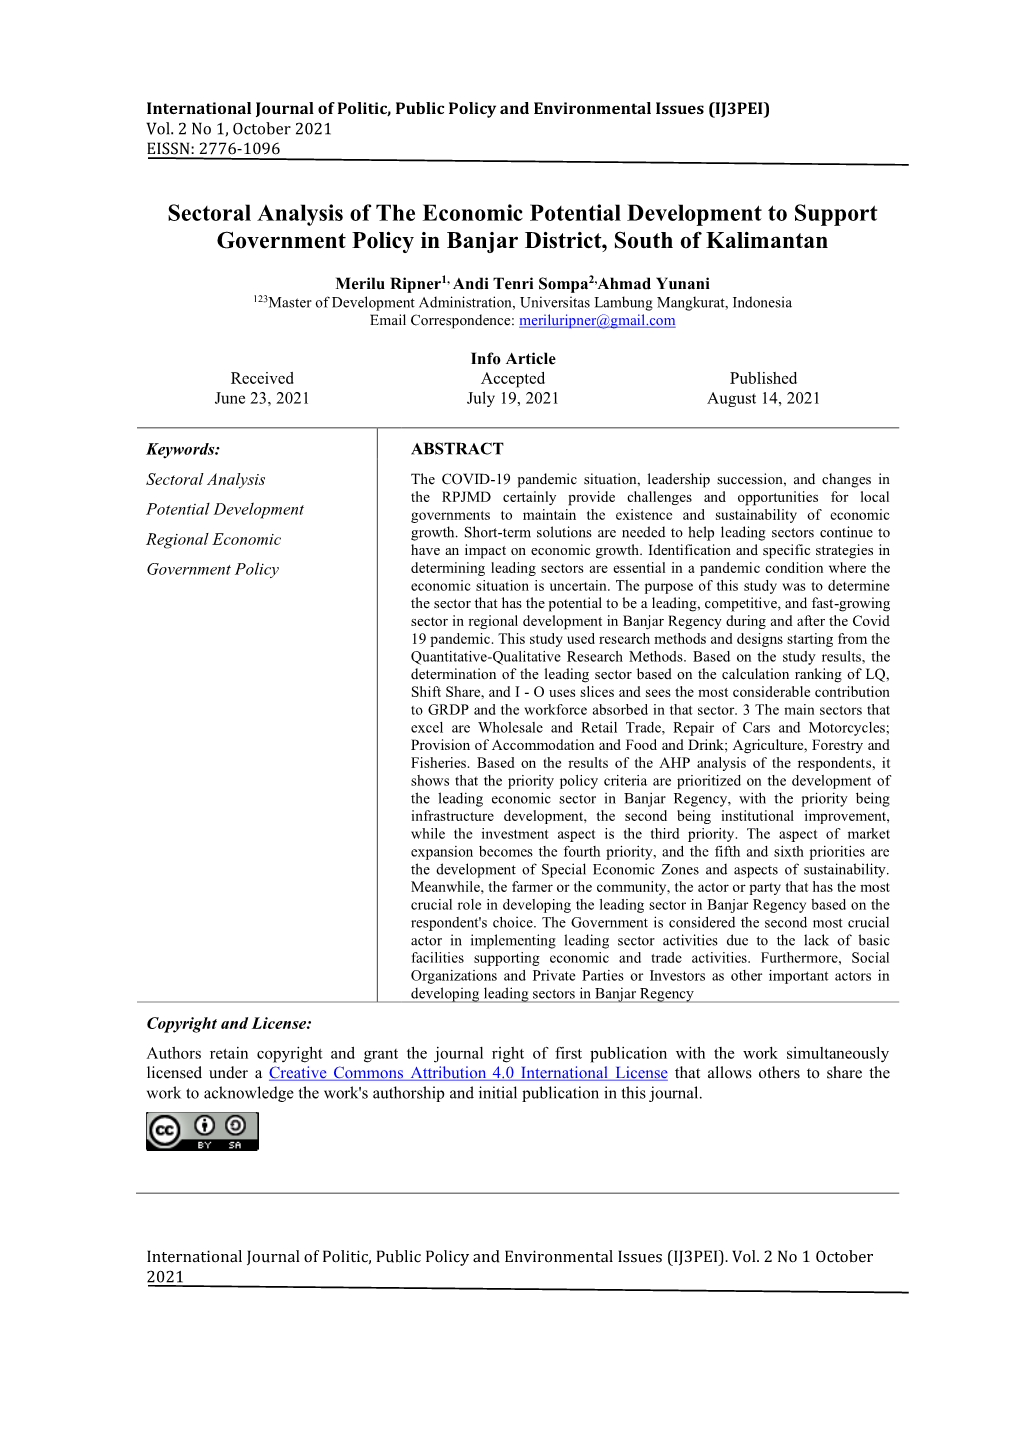 Sectoral Analysis of the Economic Potential Development to Support Government Policy in Banjar District, South of Kalimantan